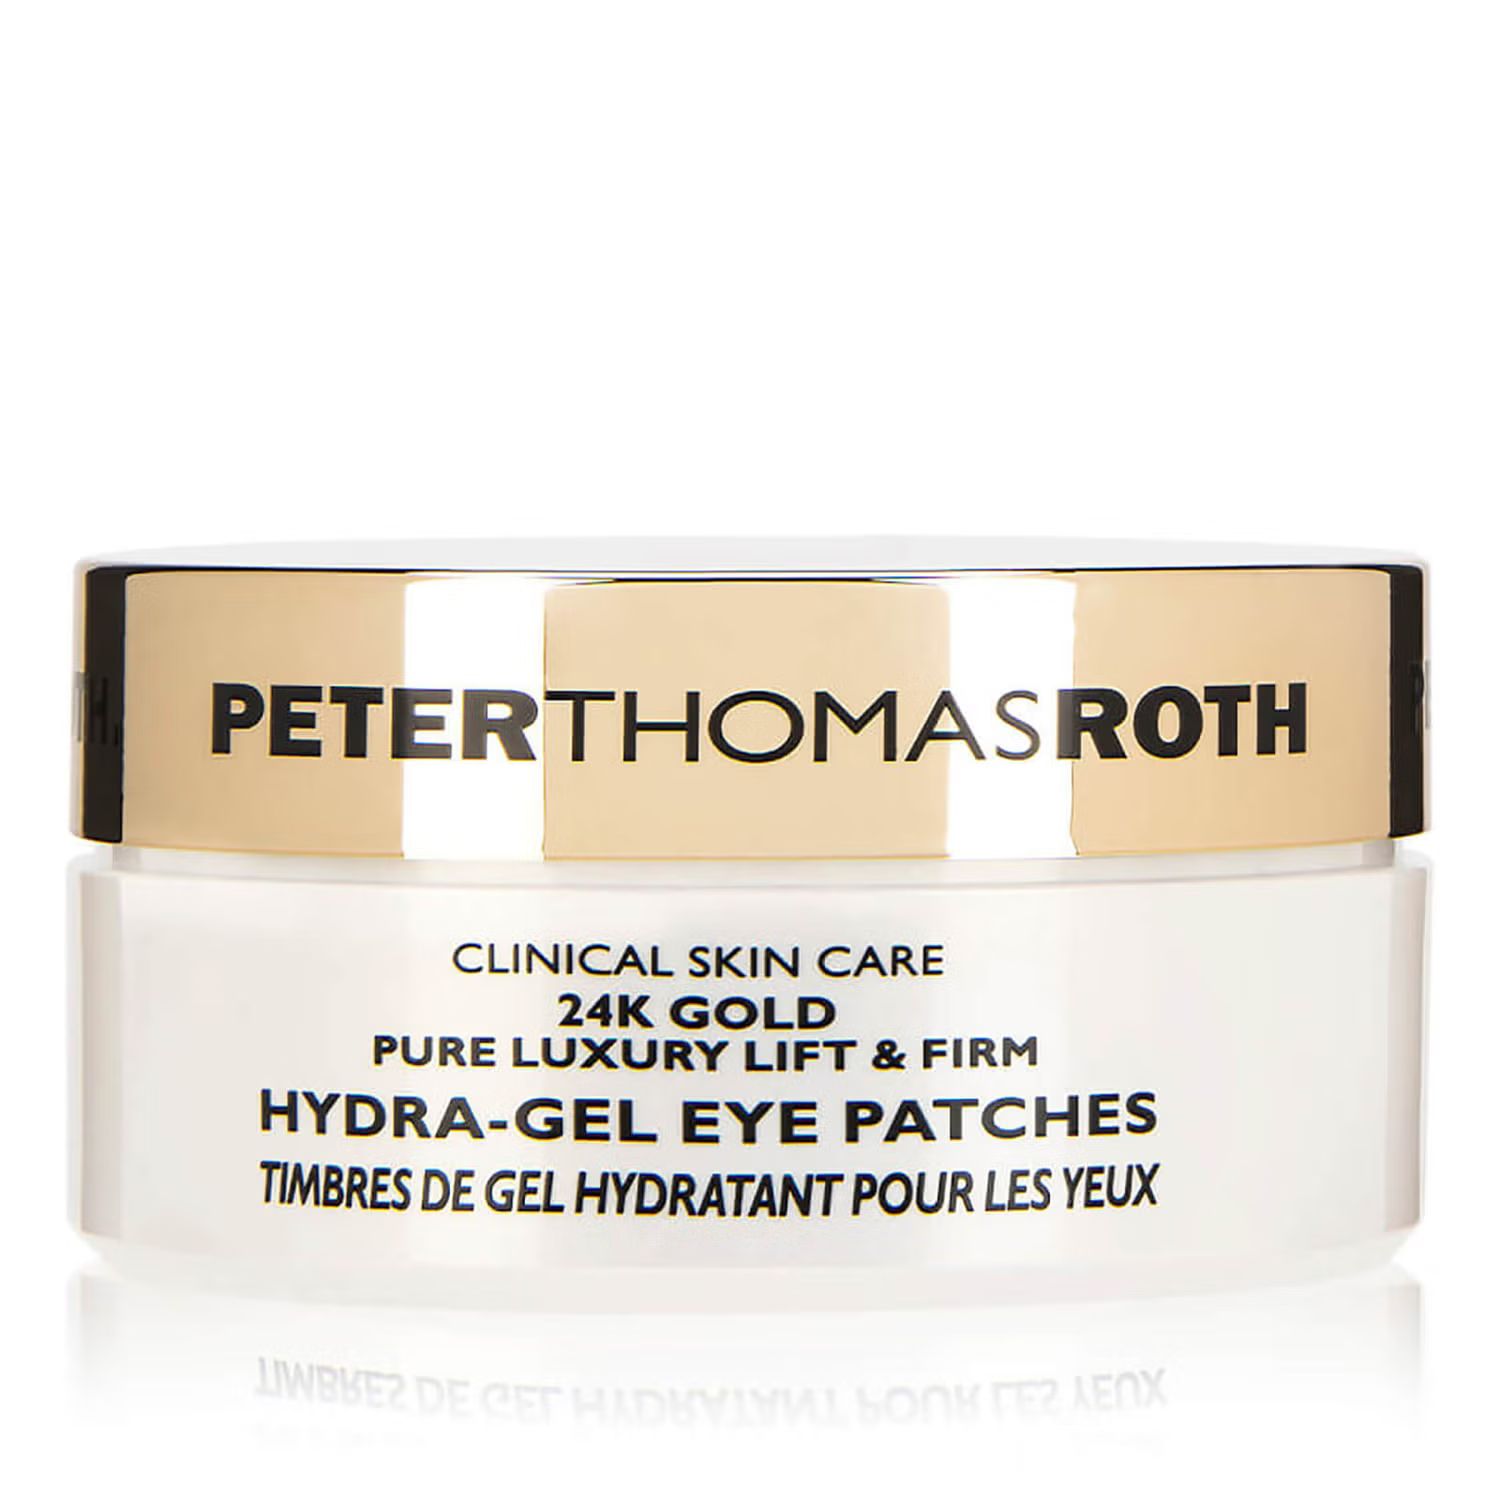 Peter Thomas Roth 24K Gold Pure Luxury Lift and Firm Hydra-Gel Eye Patches (30 pair) | Dermstore (US)